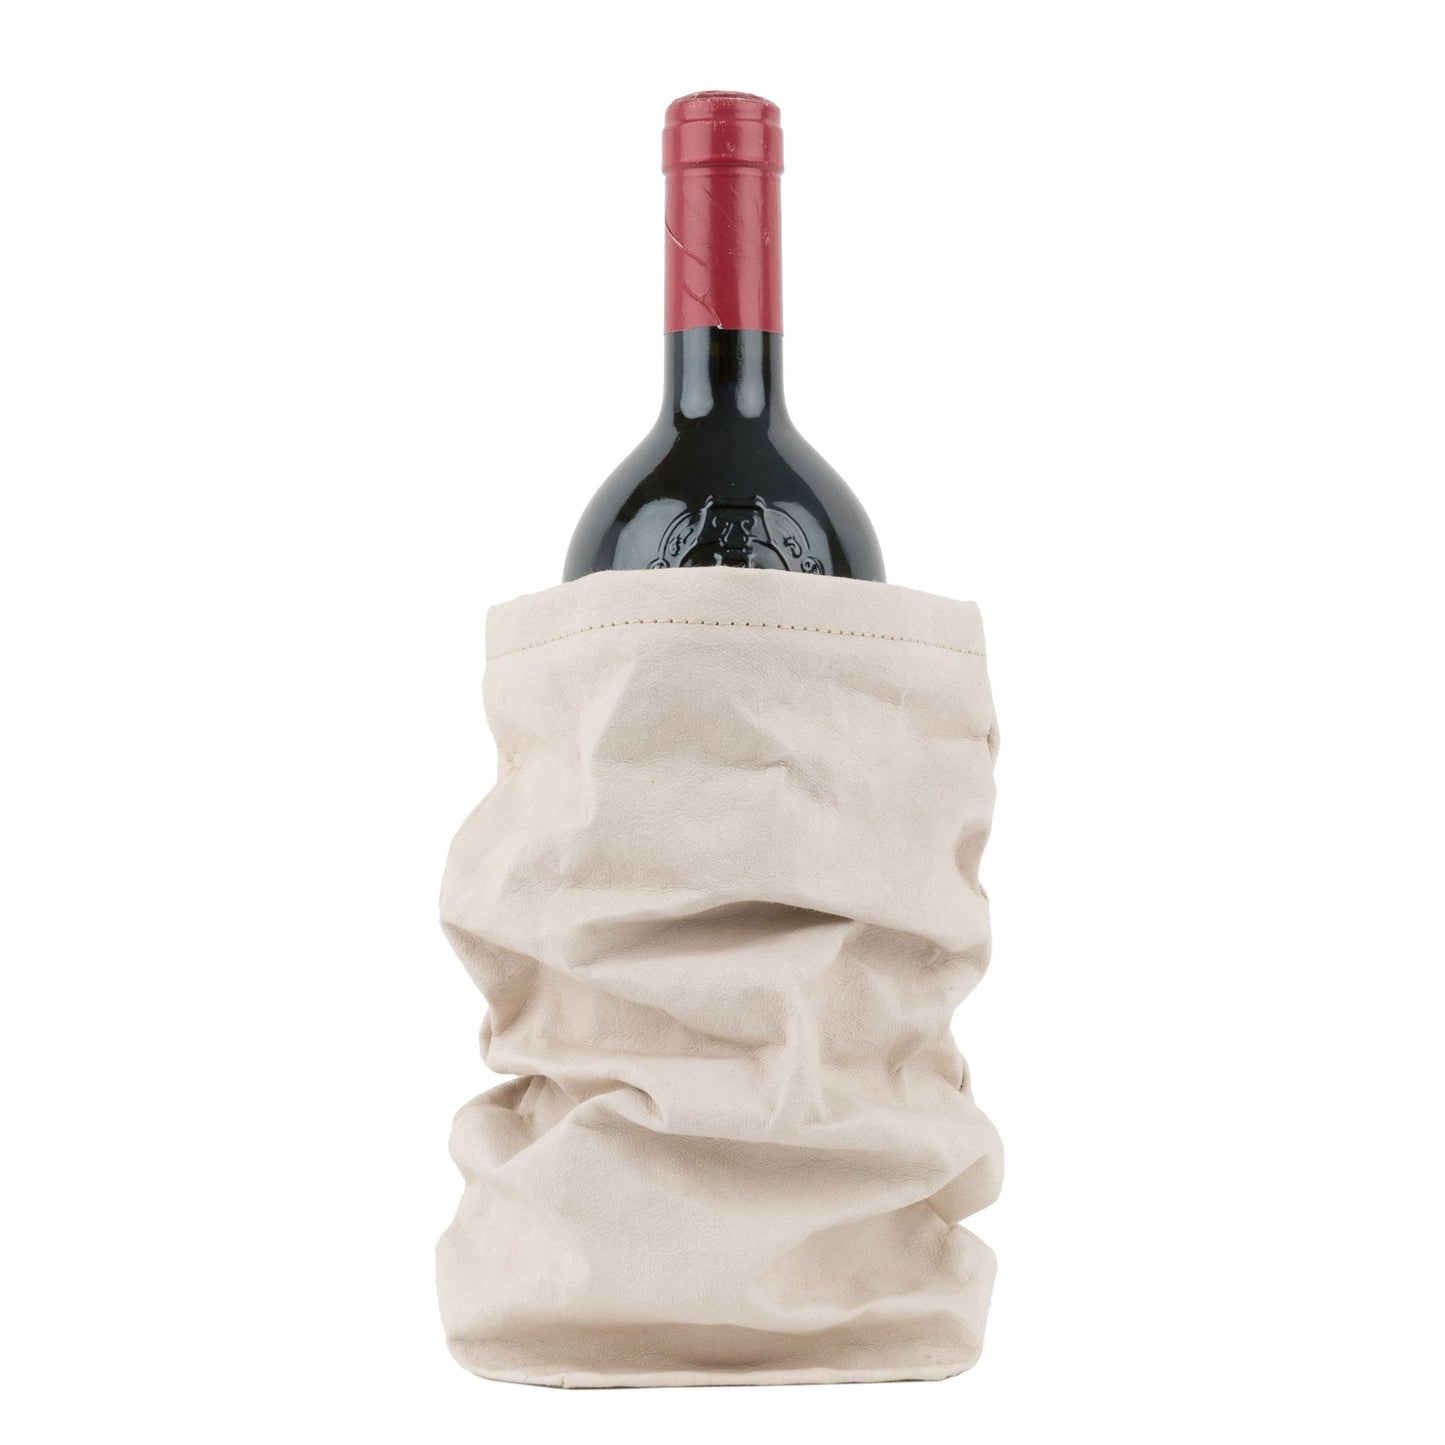 A bottle of red wine is shown inside a grey washable paper wine holder.